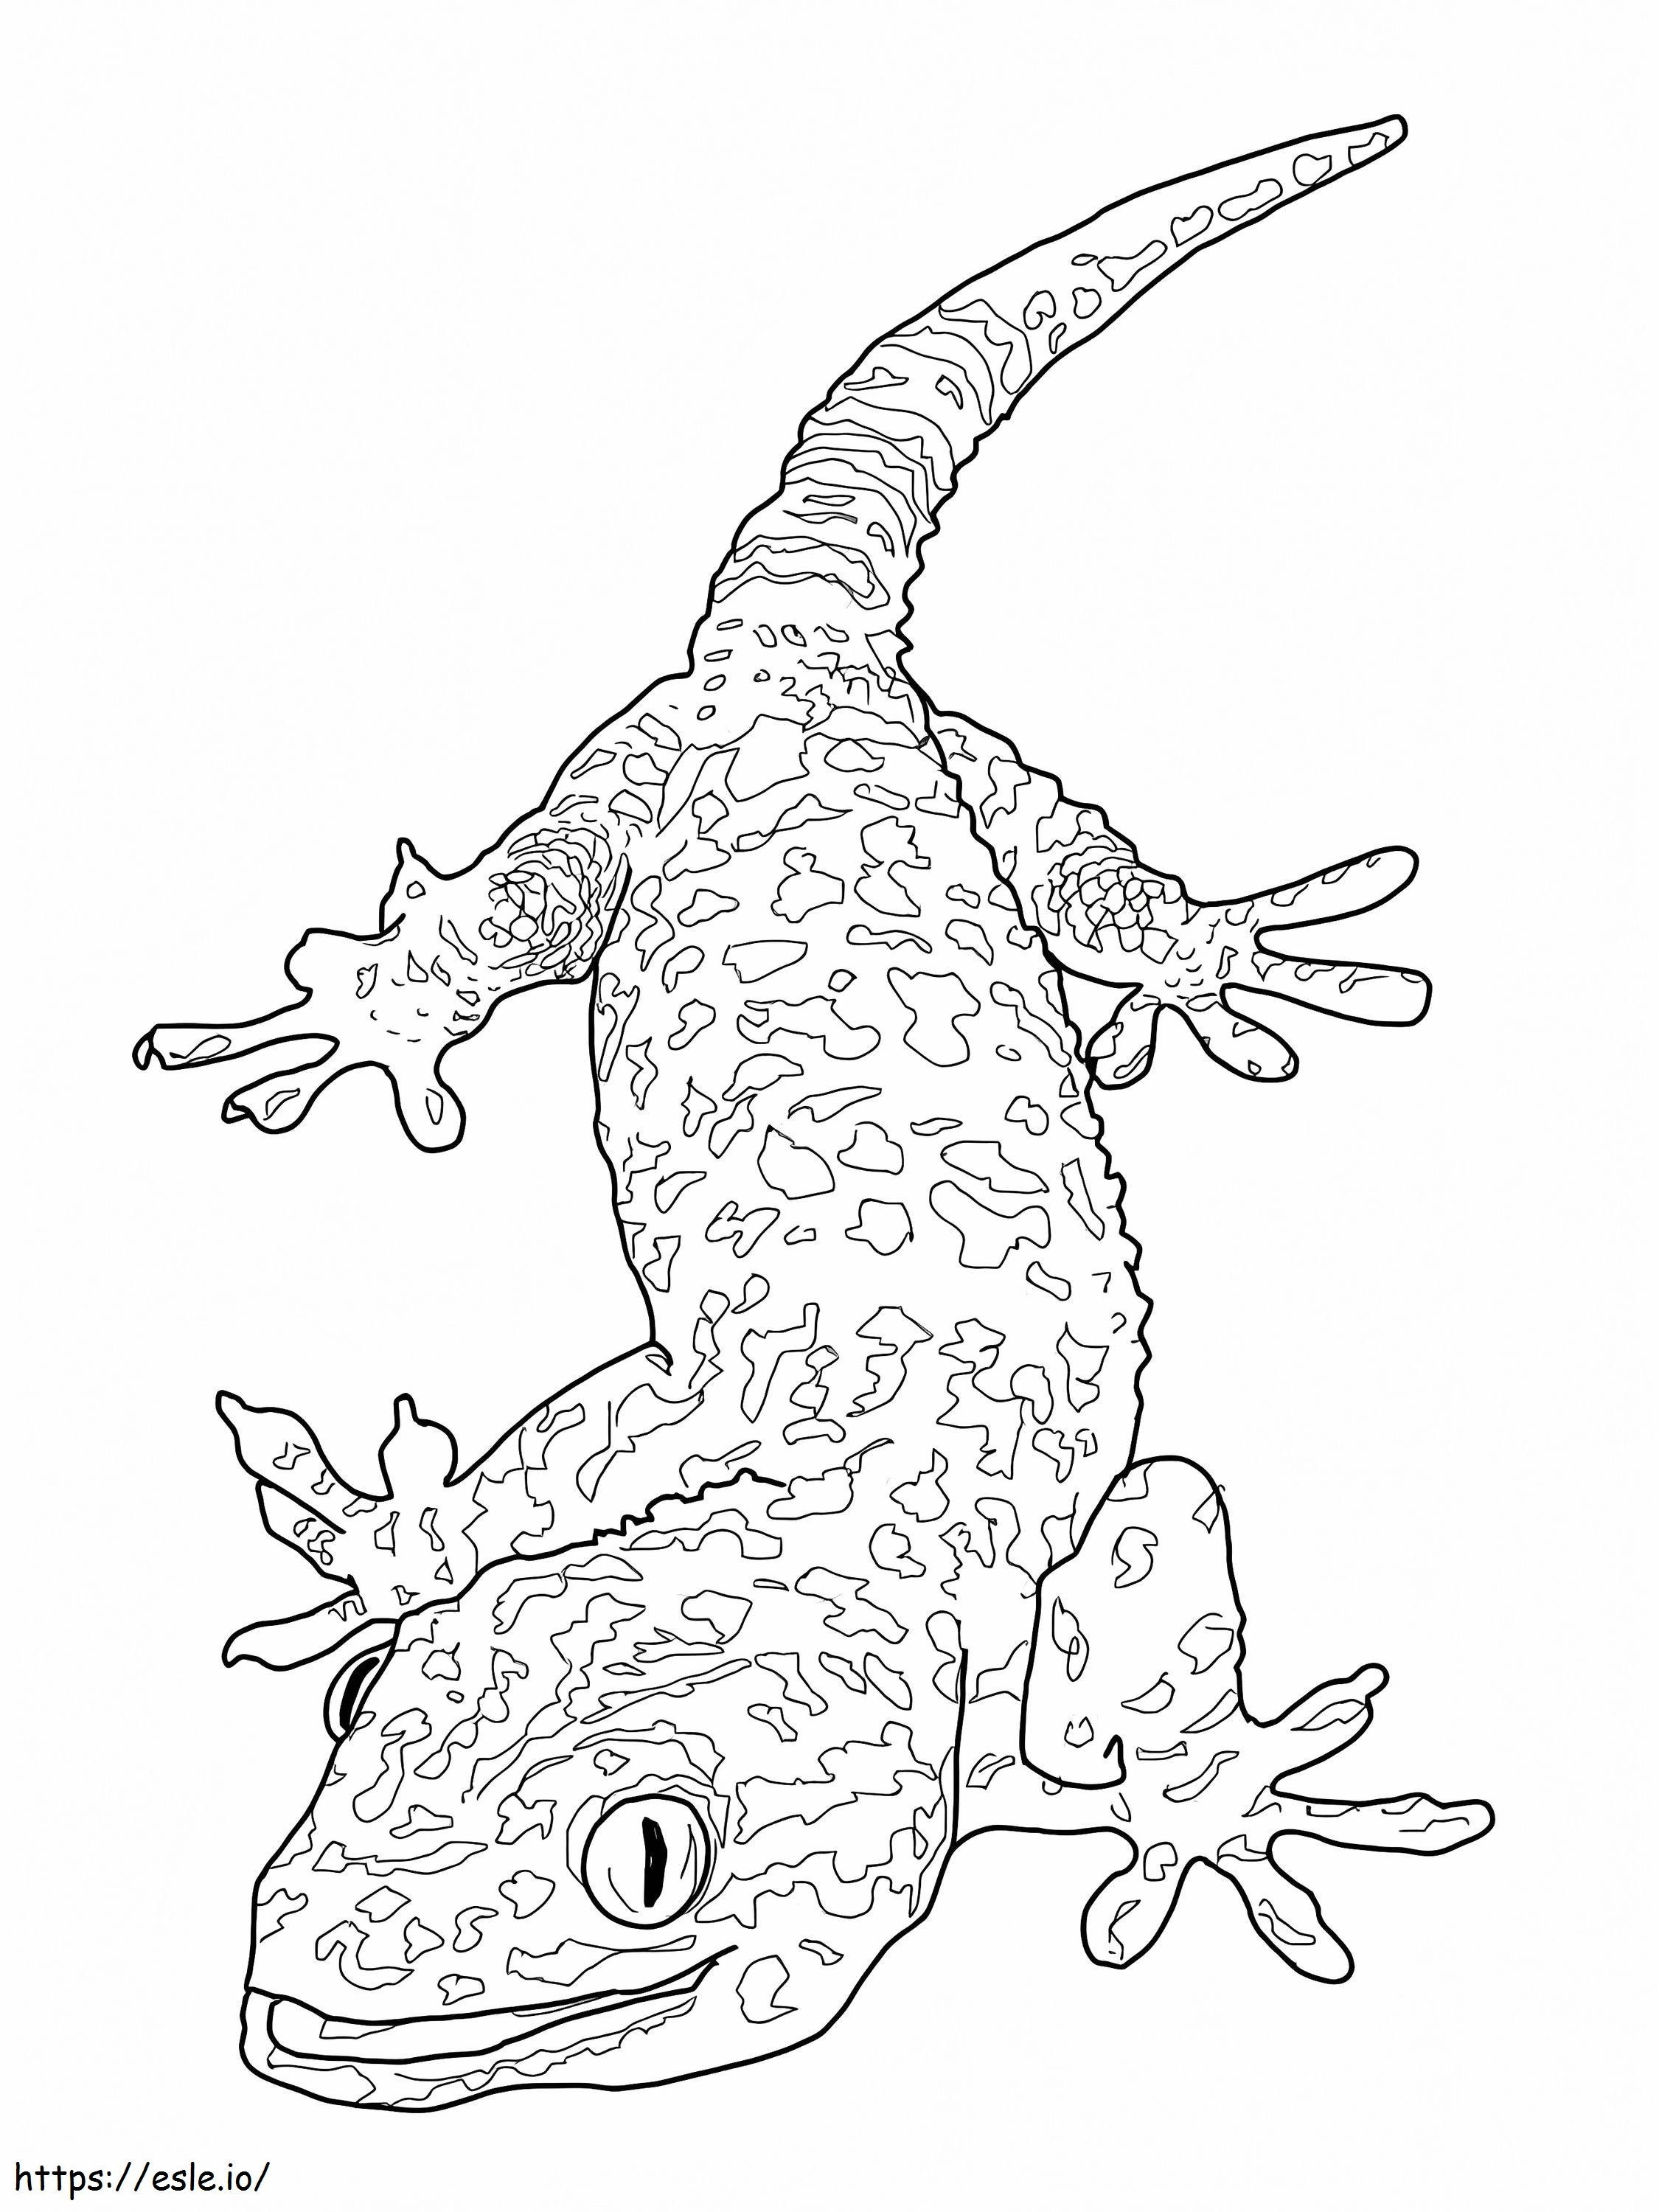 Hard Lizard coloring page